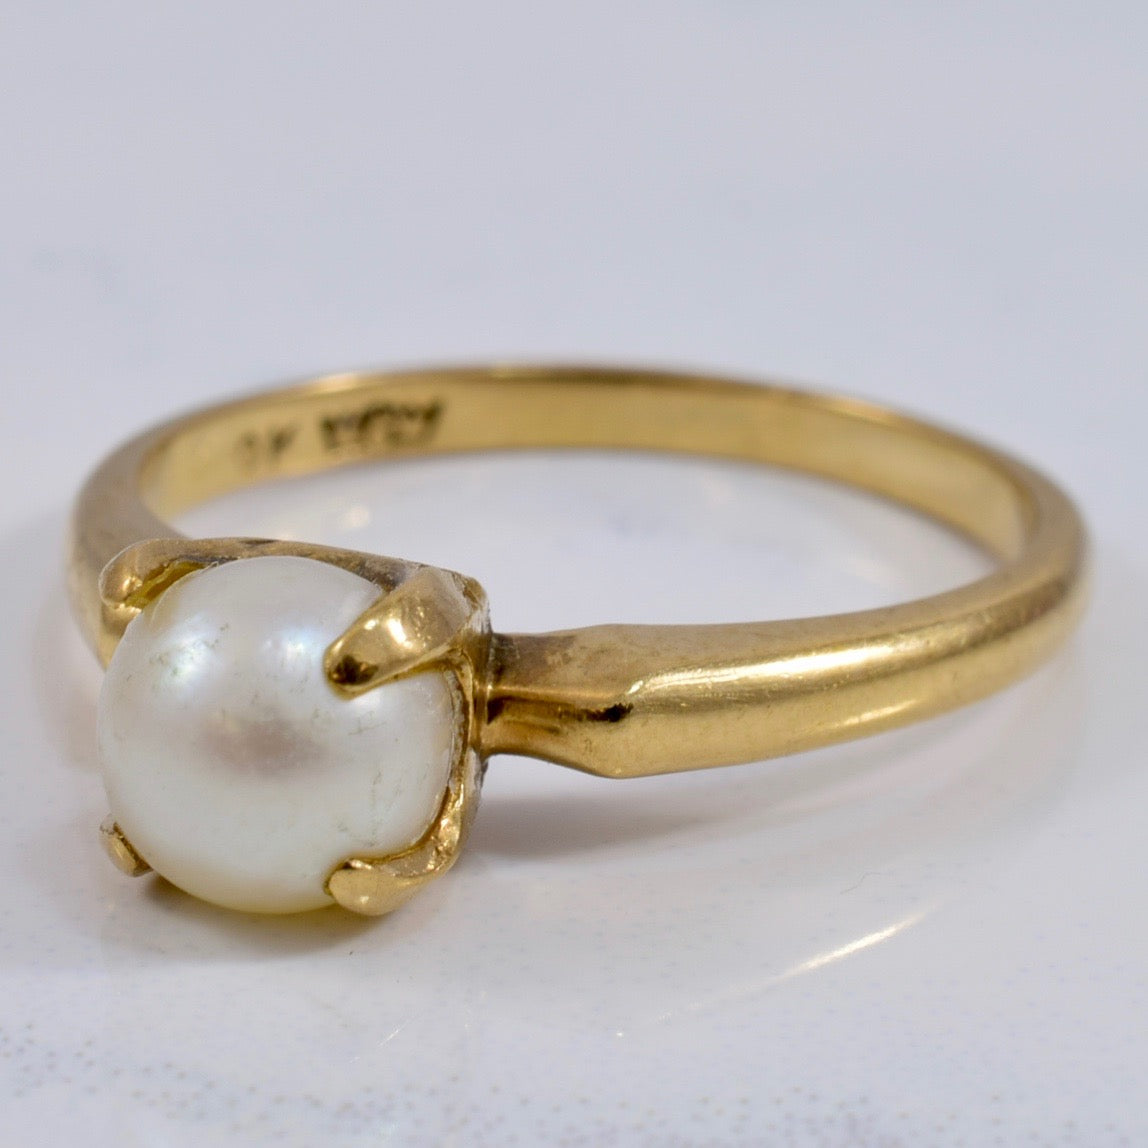 Solitaire Pearl Ring | 1.52 ct SZ 6.25 |